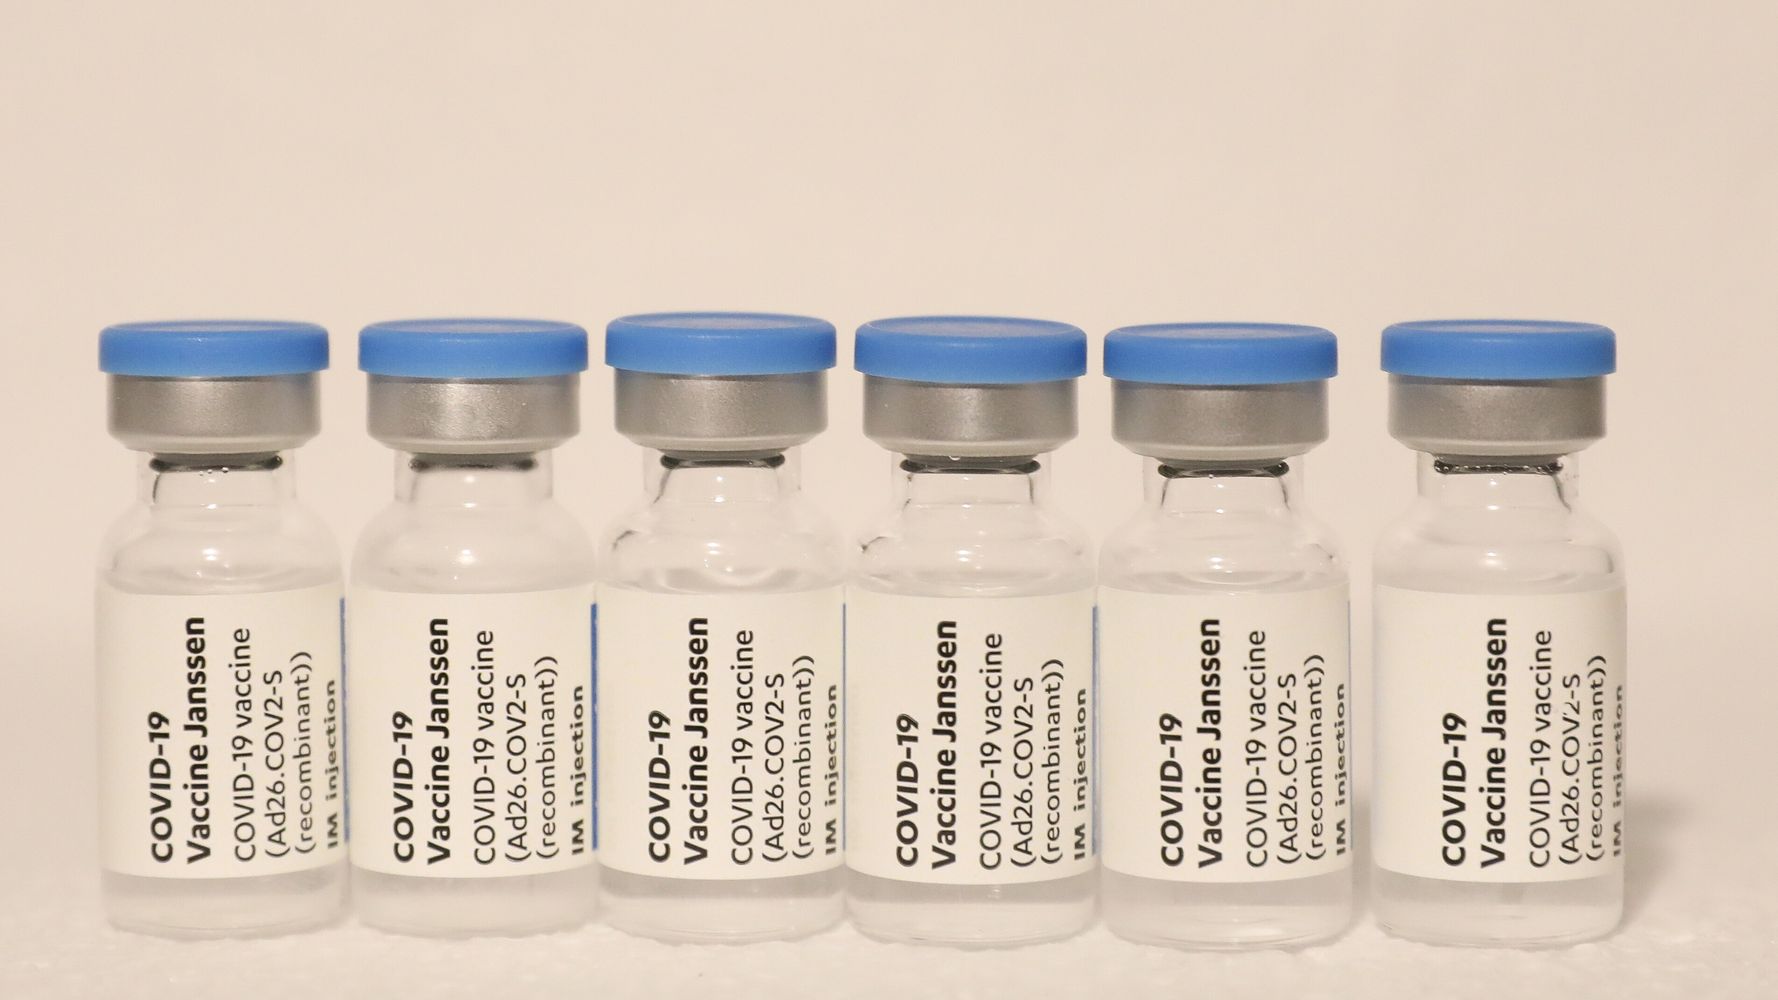 What To Know About The J&J COVID Vaccine And Guillain-Barre Syndrome